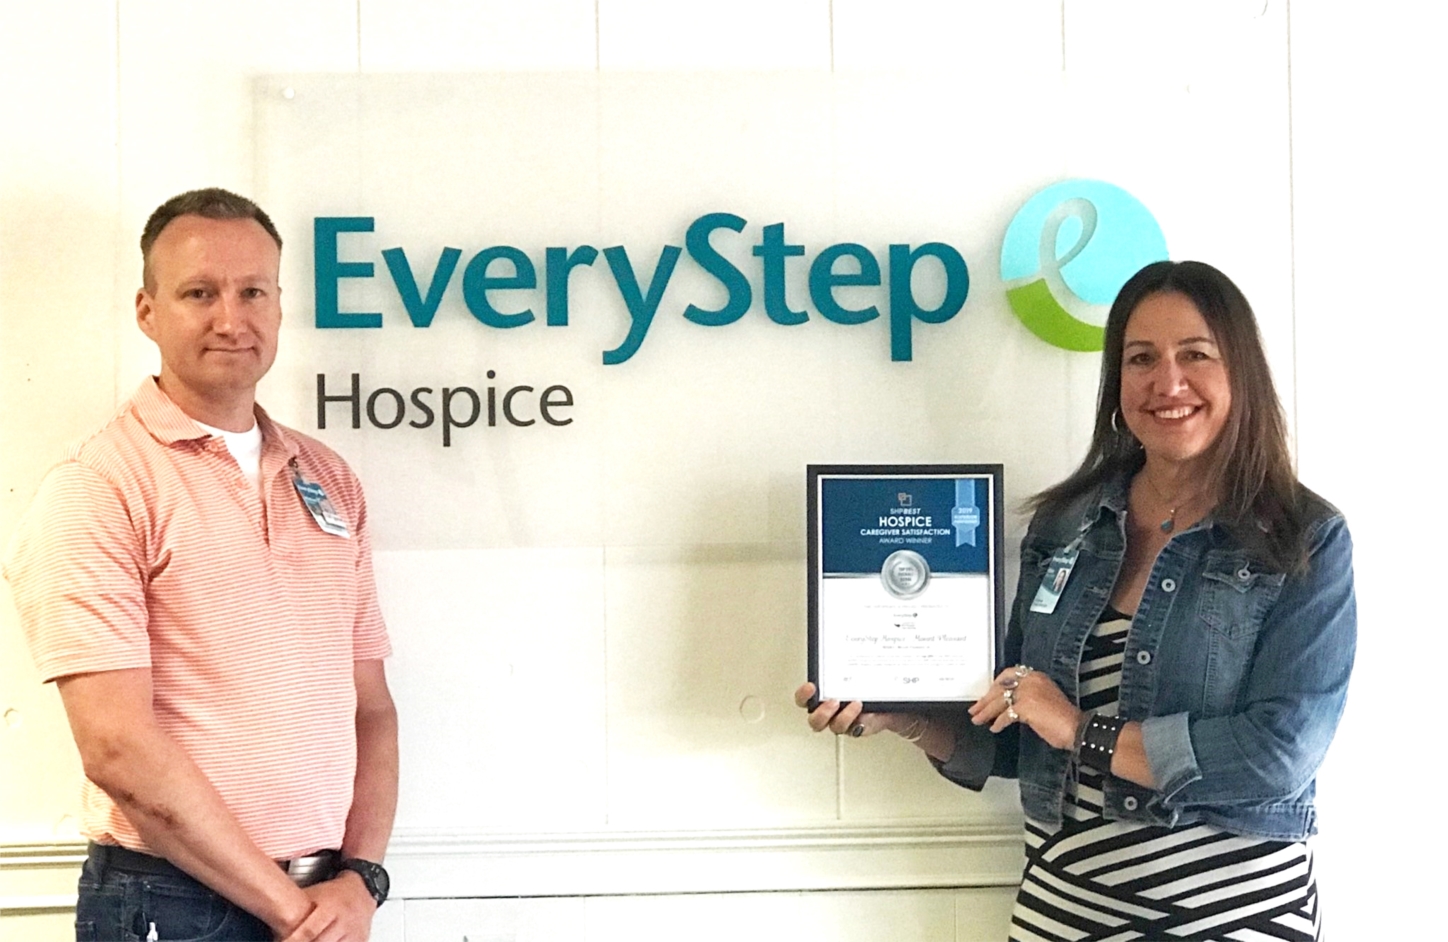 EveryStep Hospice has locations throughout the southern half of Iowa and is a trusted and accredited program.